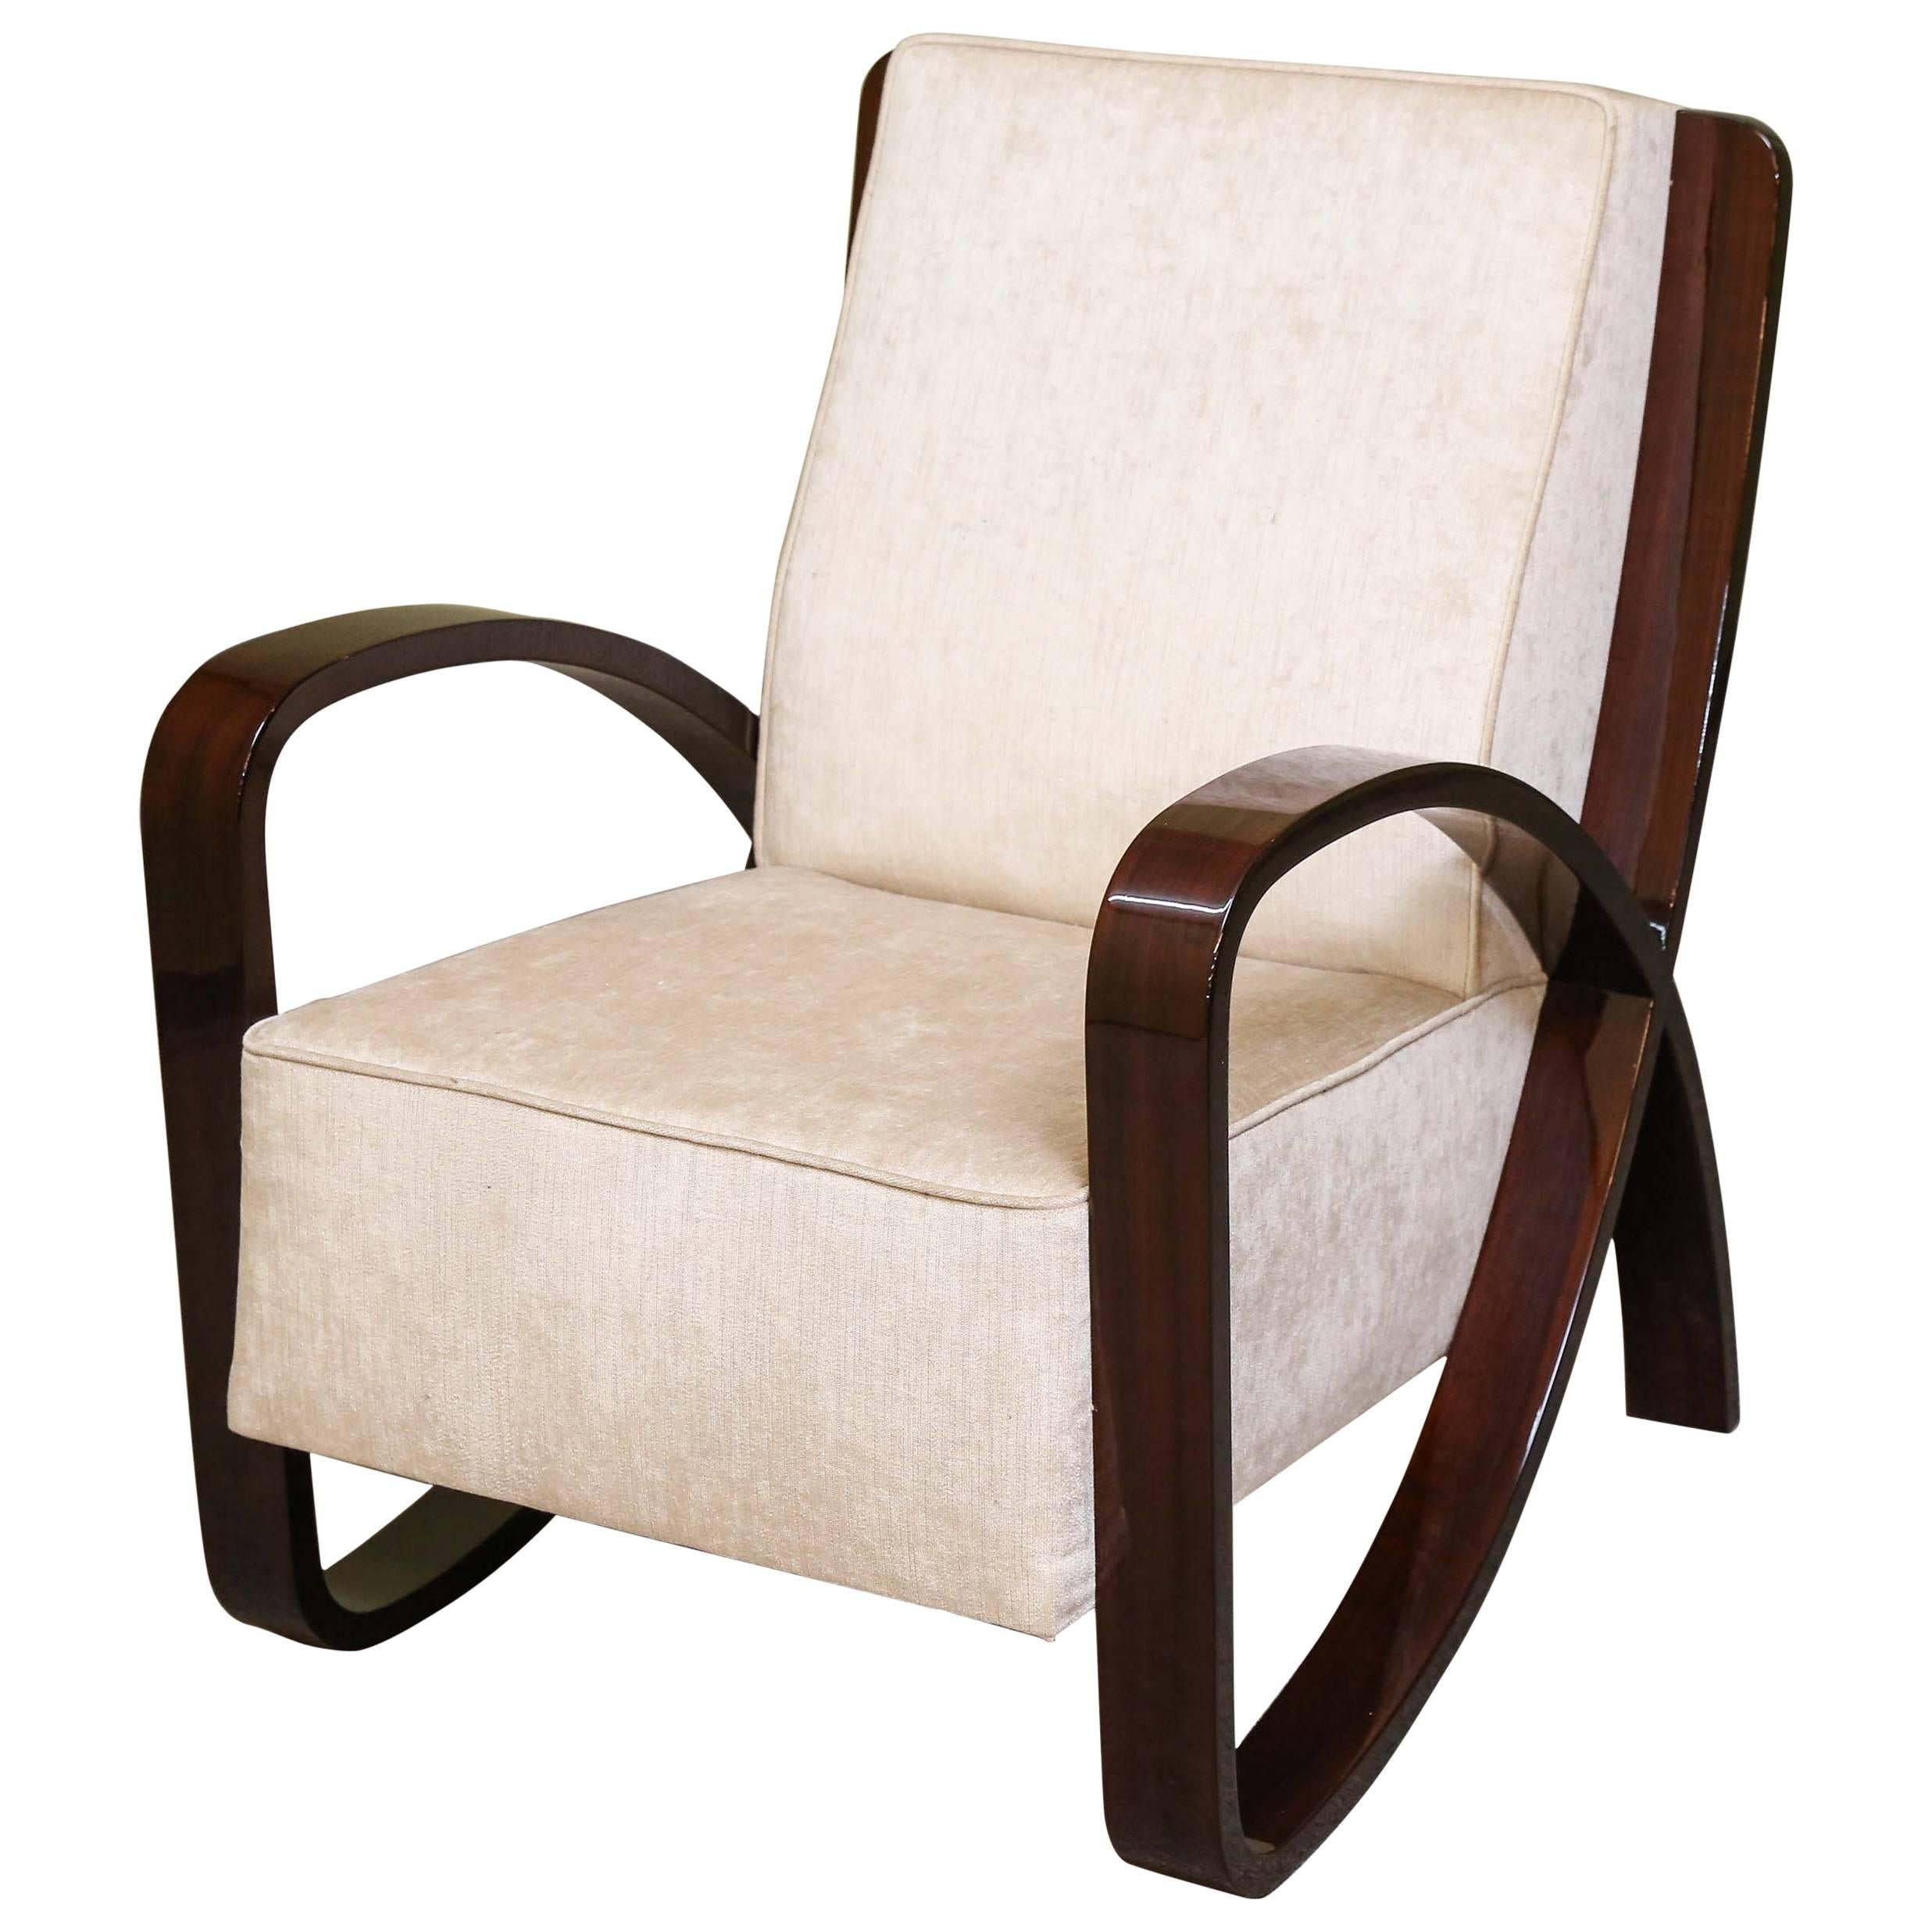 Pair of Art Deco Hungarian Armchairs in Walnut